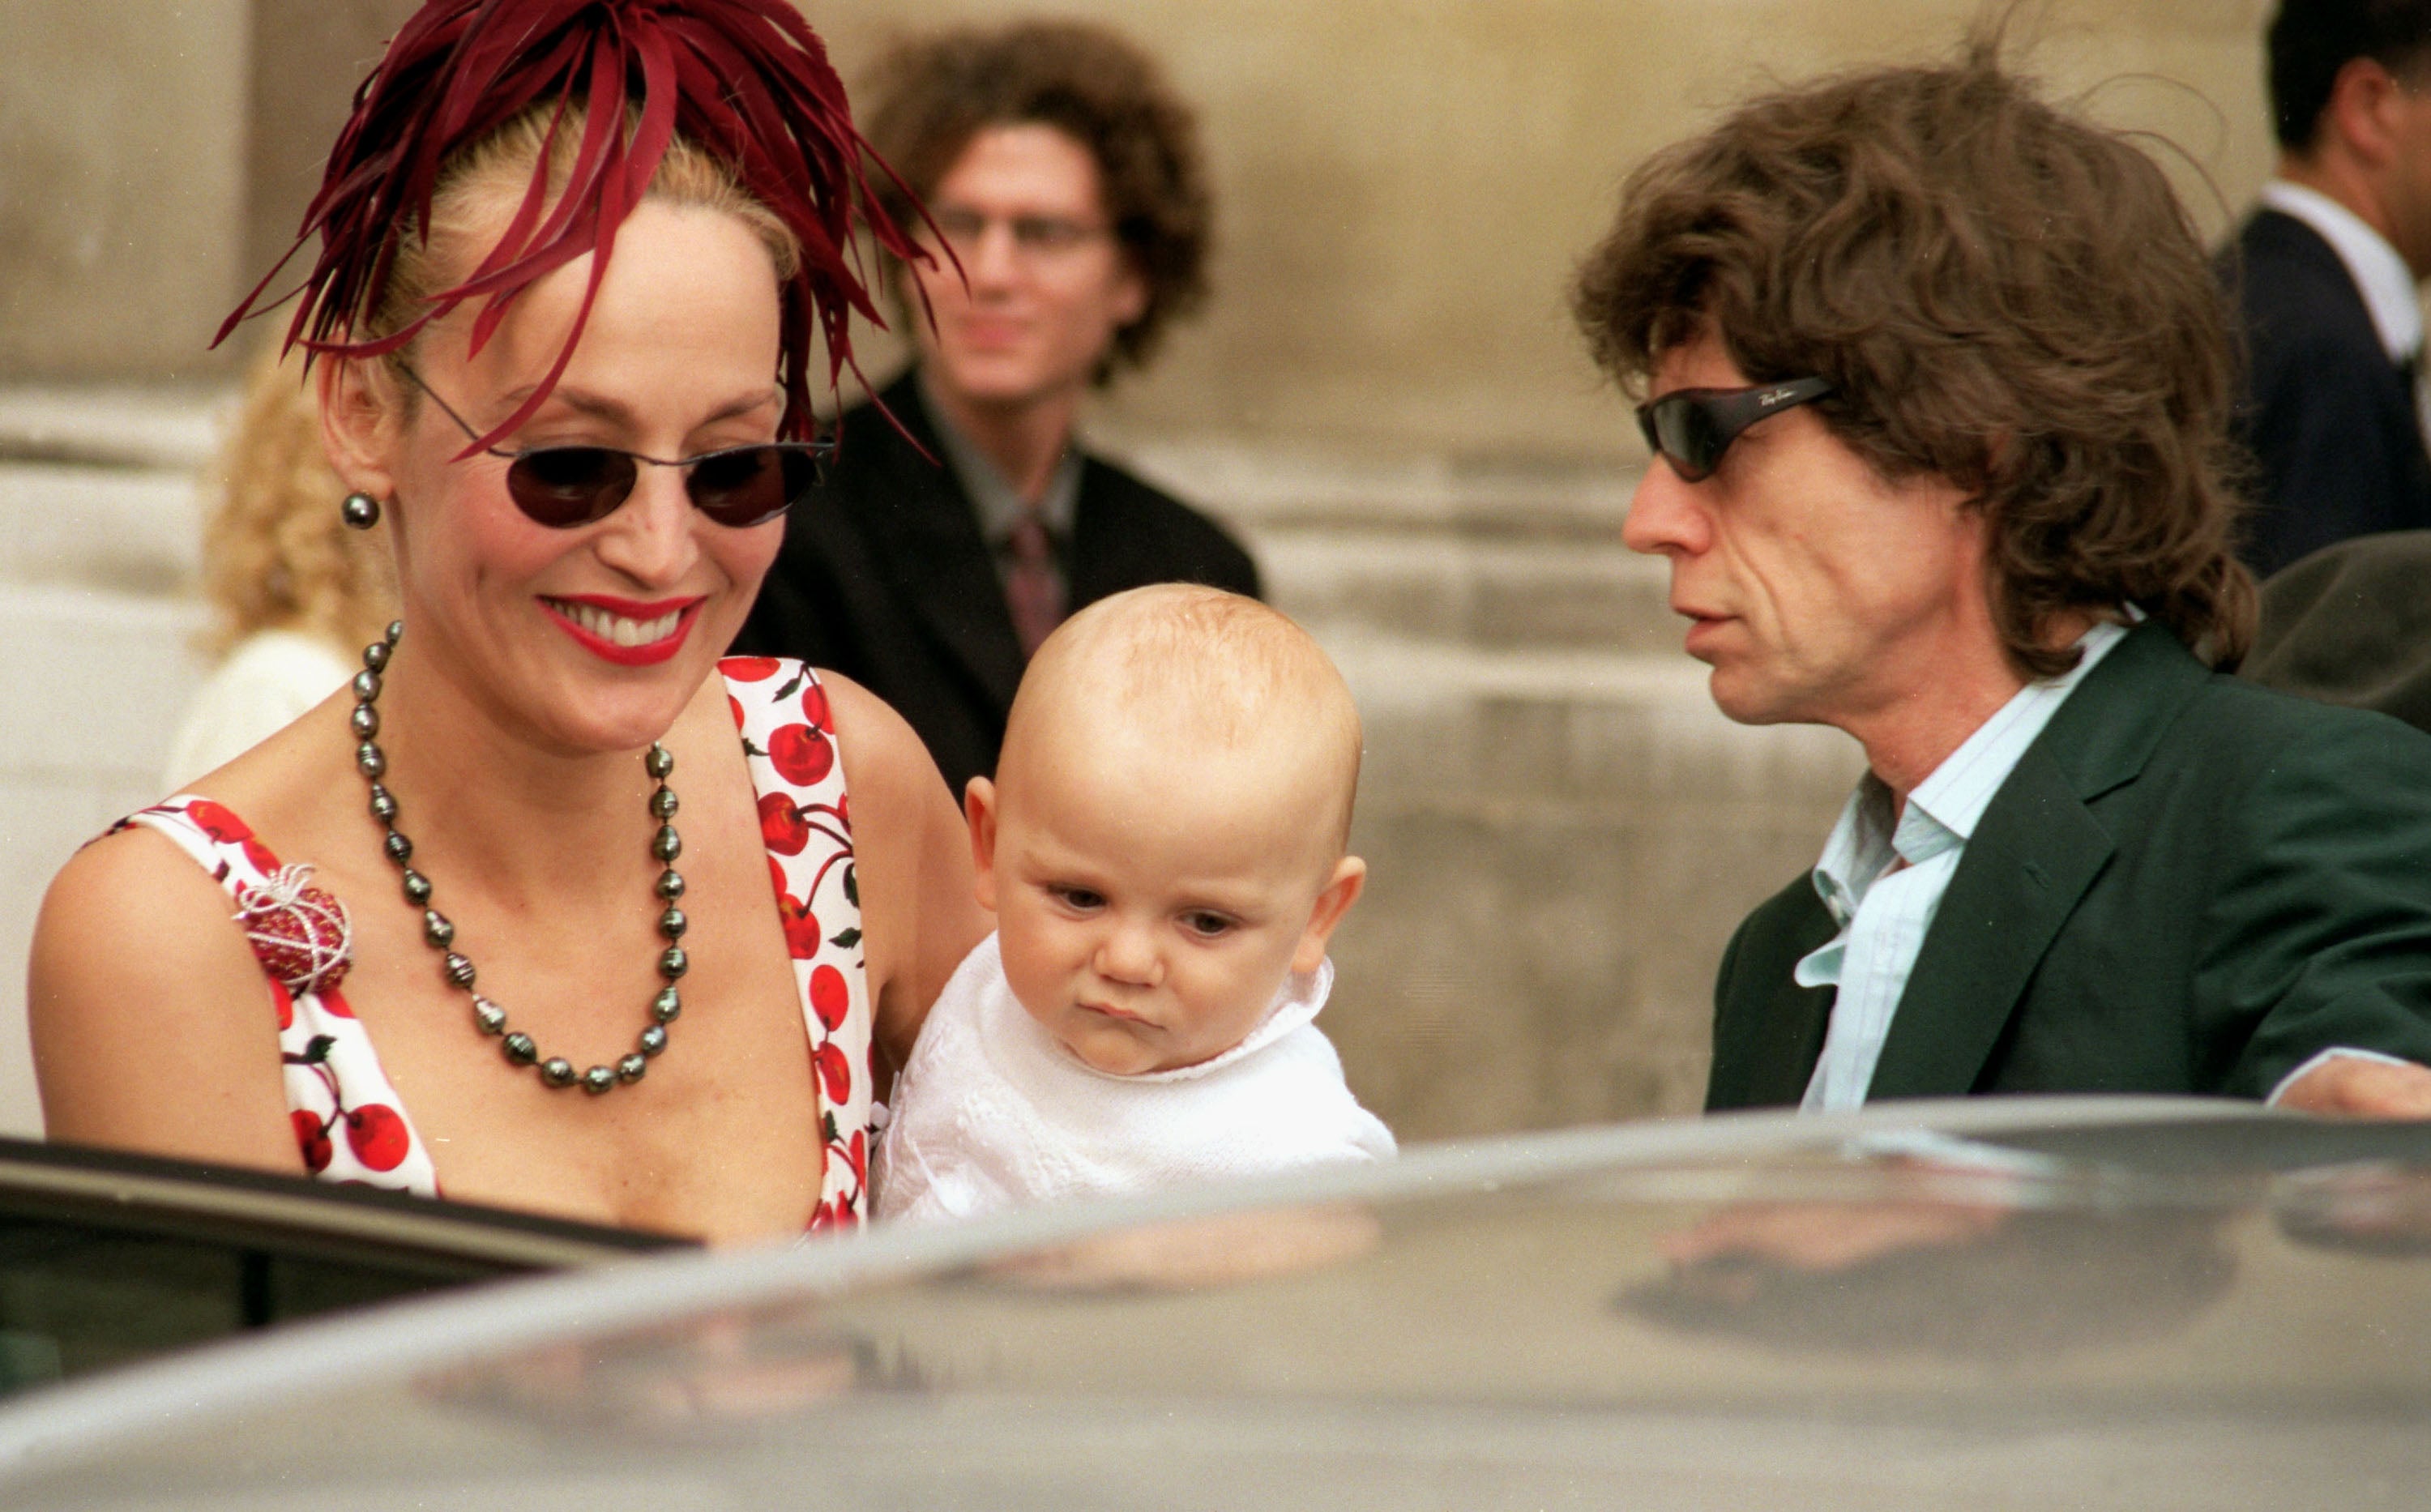 Rolling Stones’ singer Mick Jagger and model Jerry Hall with their baby, Gabriel, attend the wedding of Princess Maria-Theodora ‘Dora’ Loewenstein to Manfredi Gherardesca at the Brompton Oratory on September 27, 1998 in London